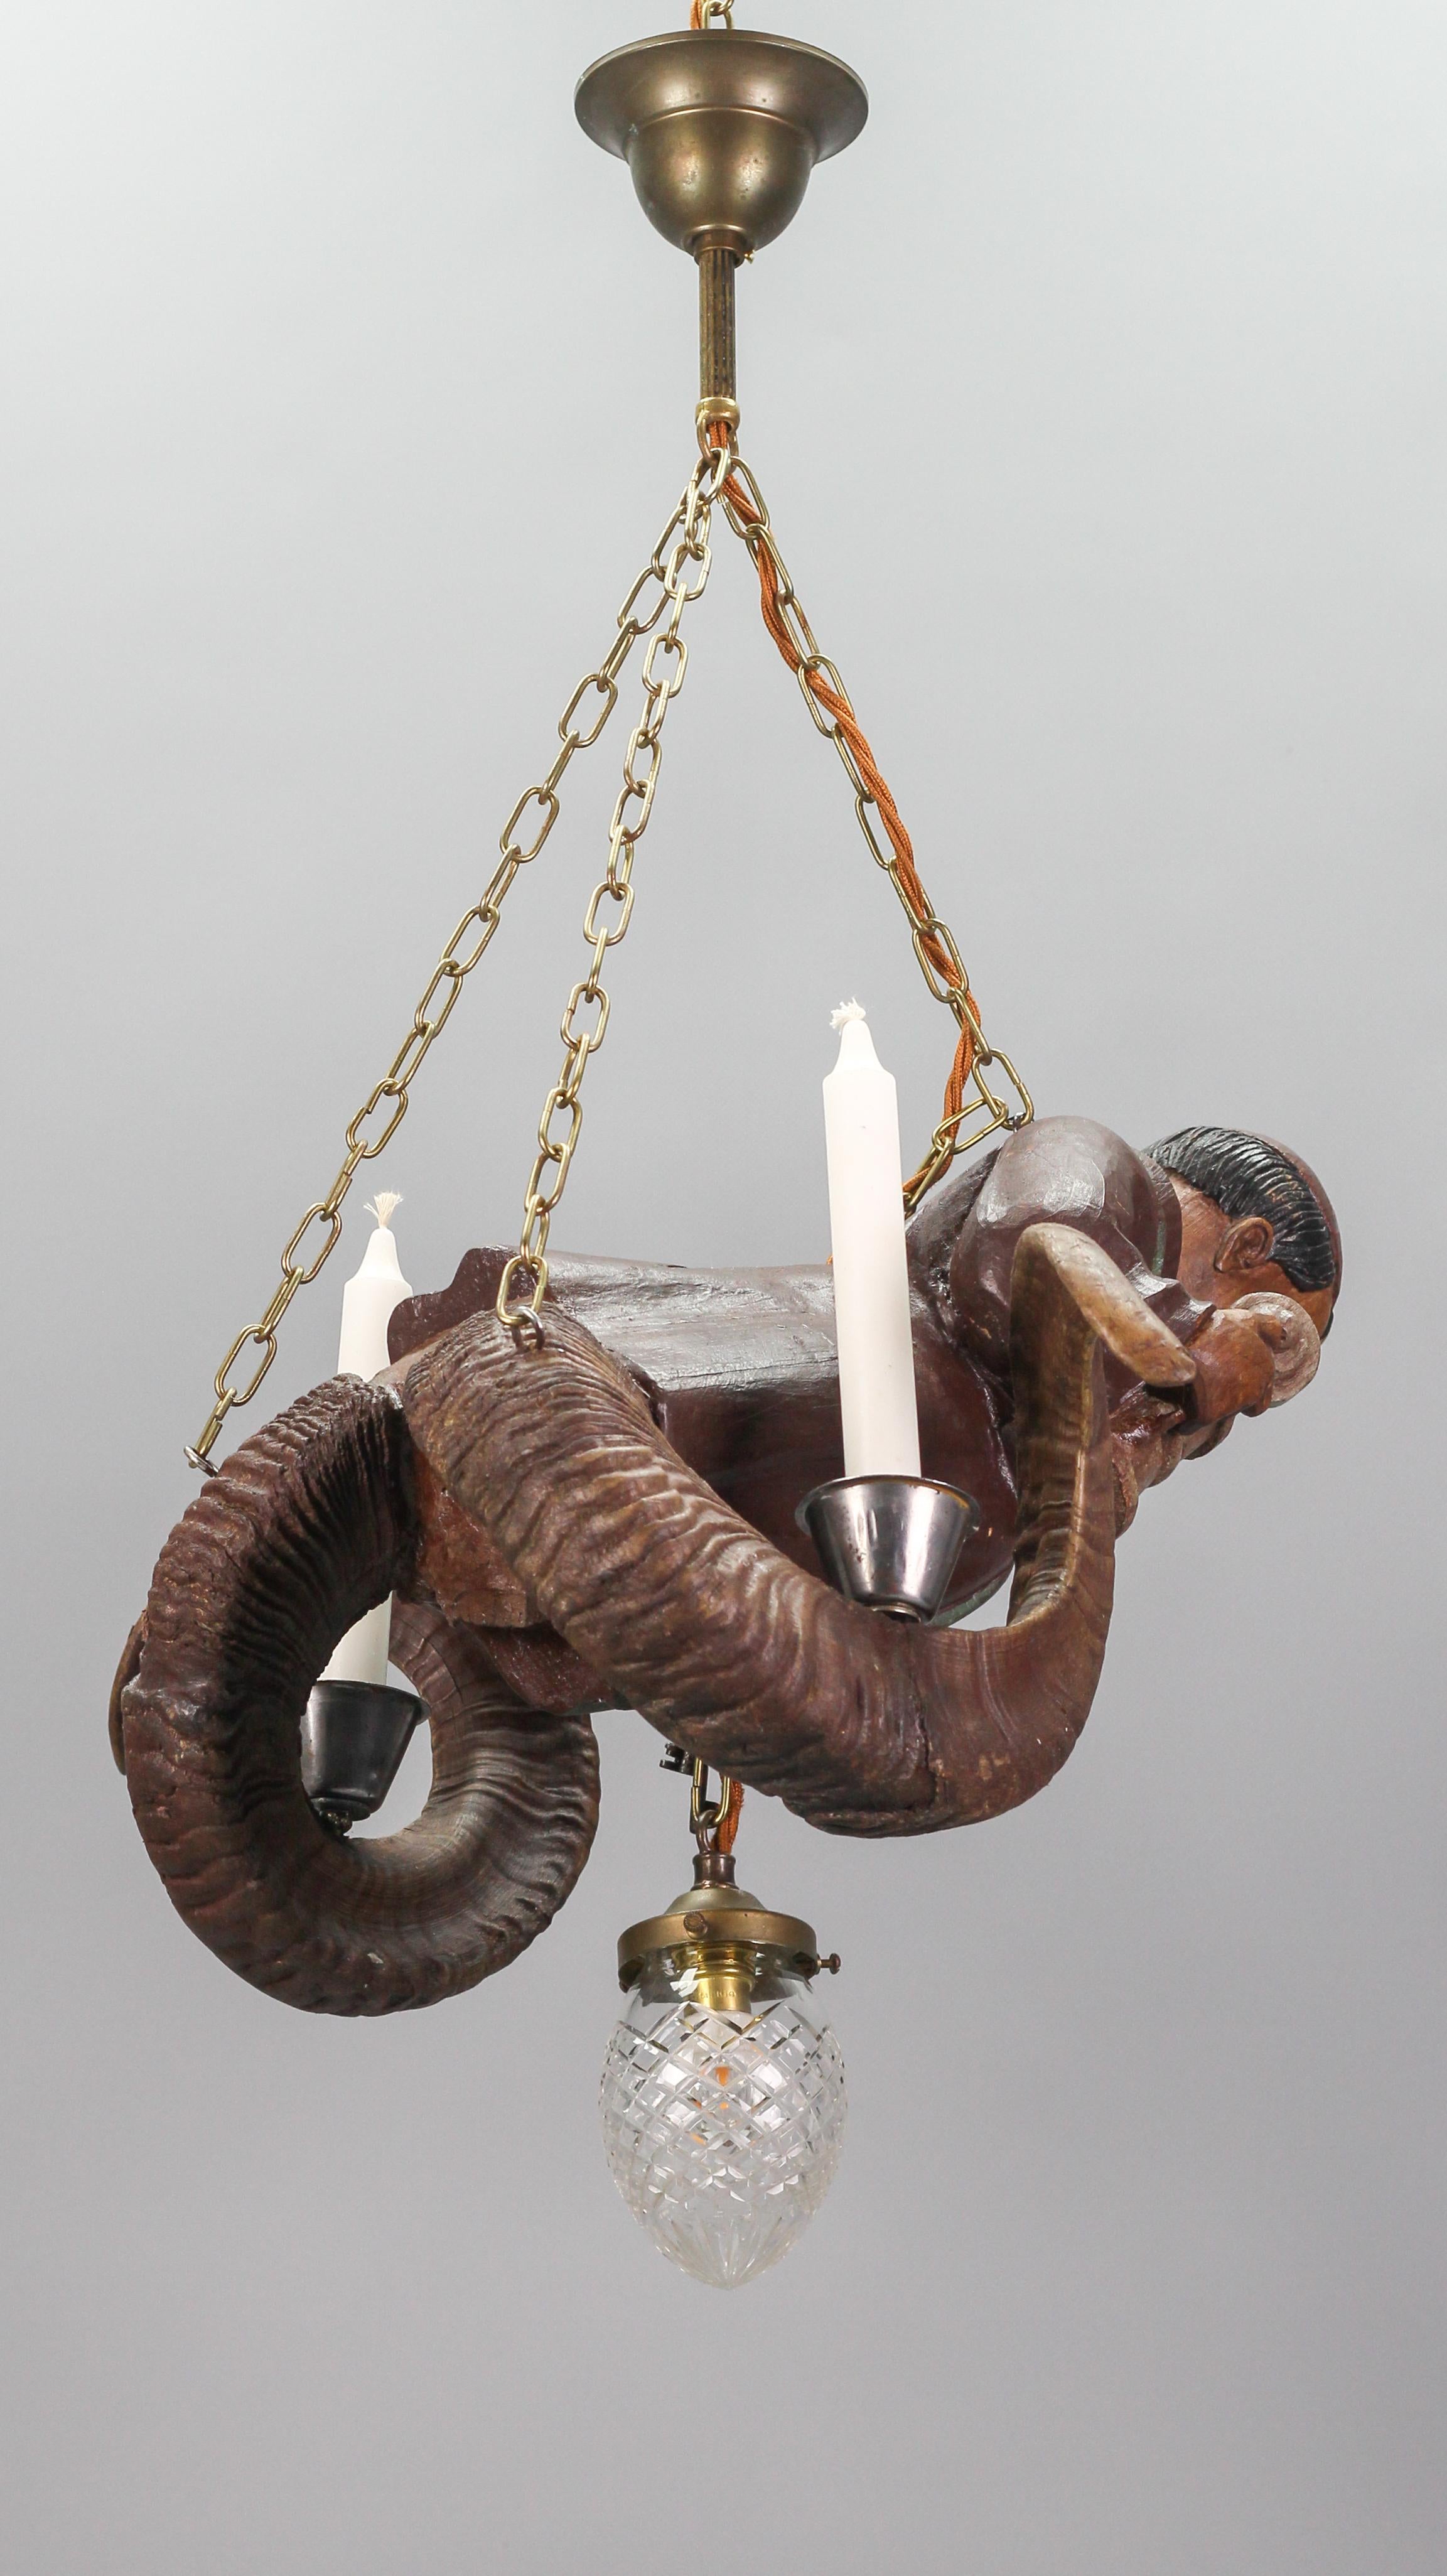 Black Forest Hand-Carved Wooden Pendant Light Lustermandl with Cellar Master Figure, ca. 1920